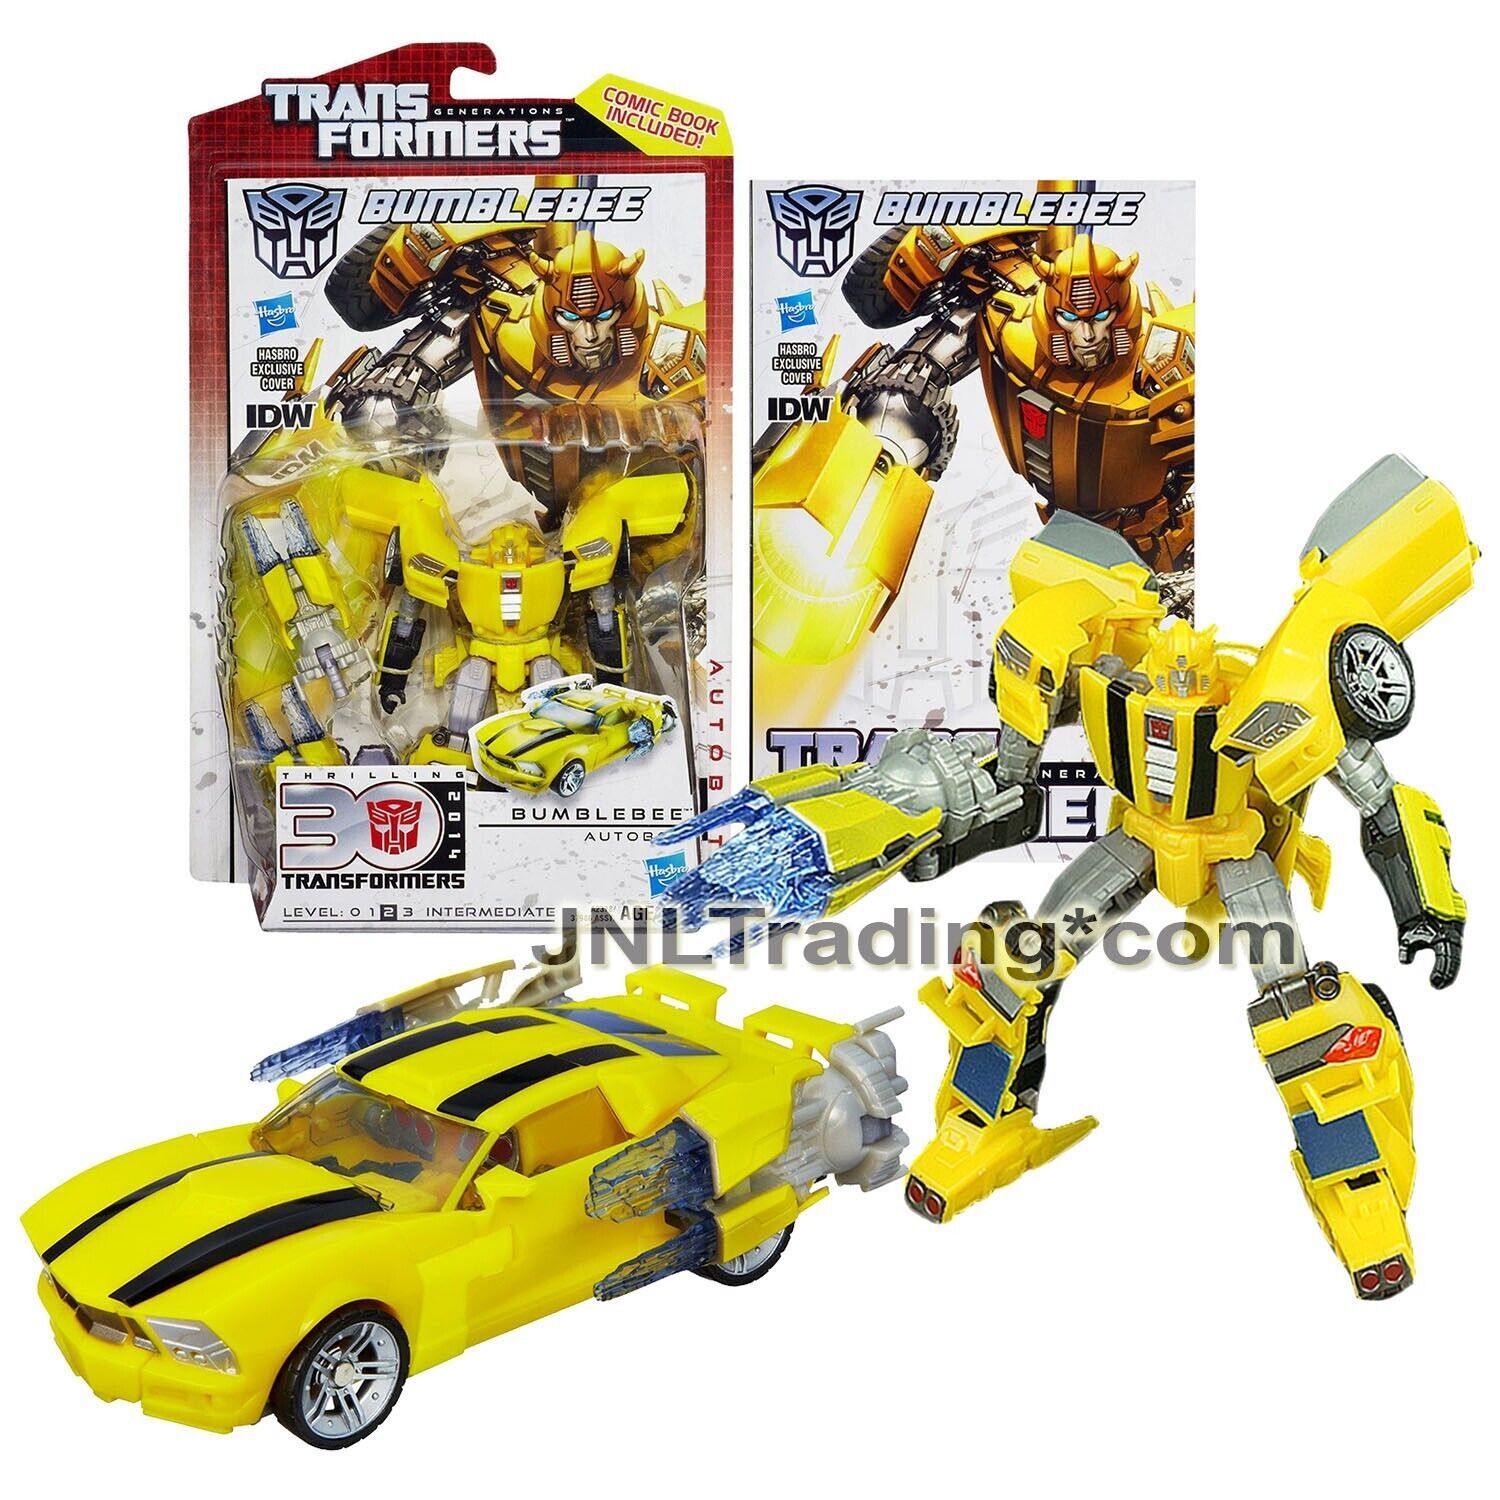 Primary image for Year 2012 Transformers Generations Thrilling 30 Deluxe 6 Inch Figure - BUMBLEBEE